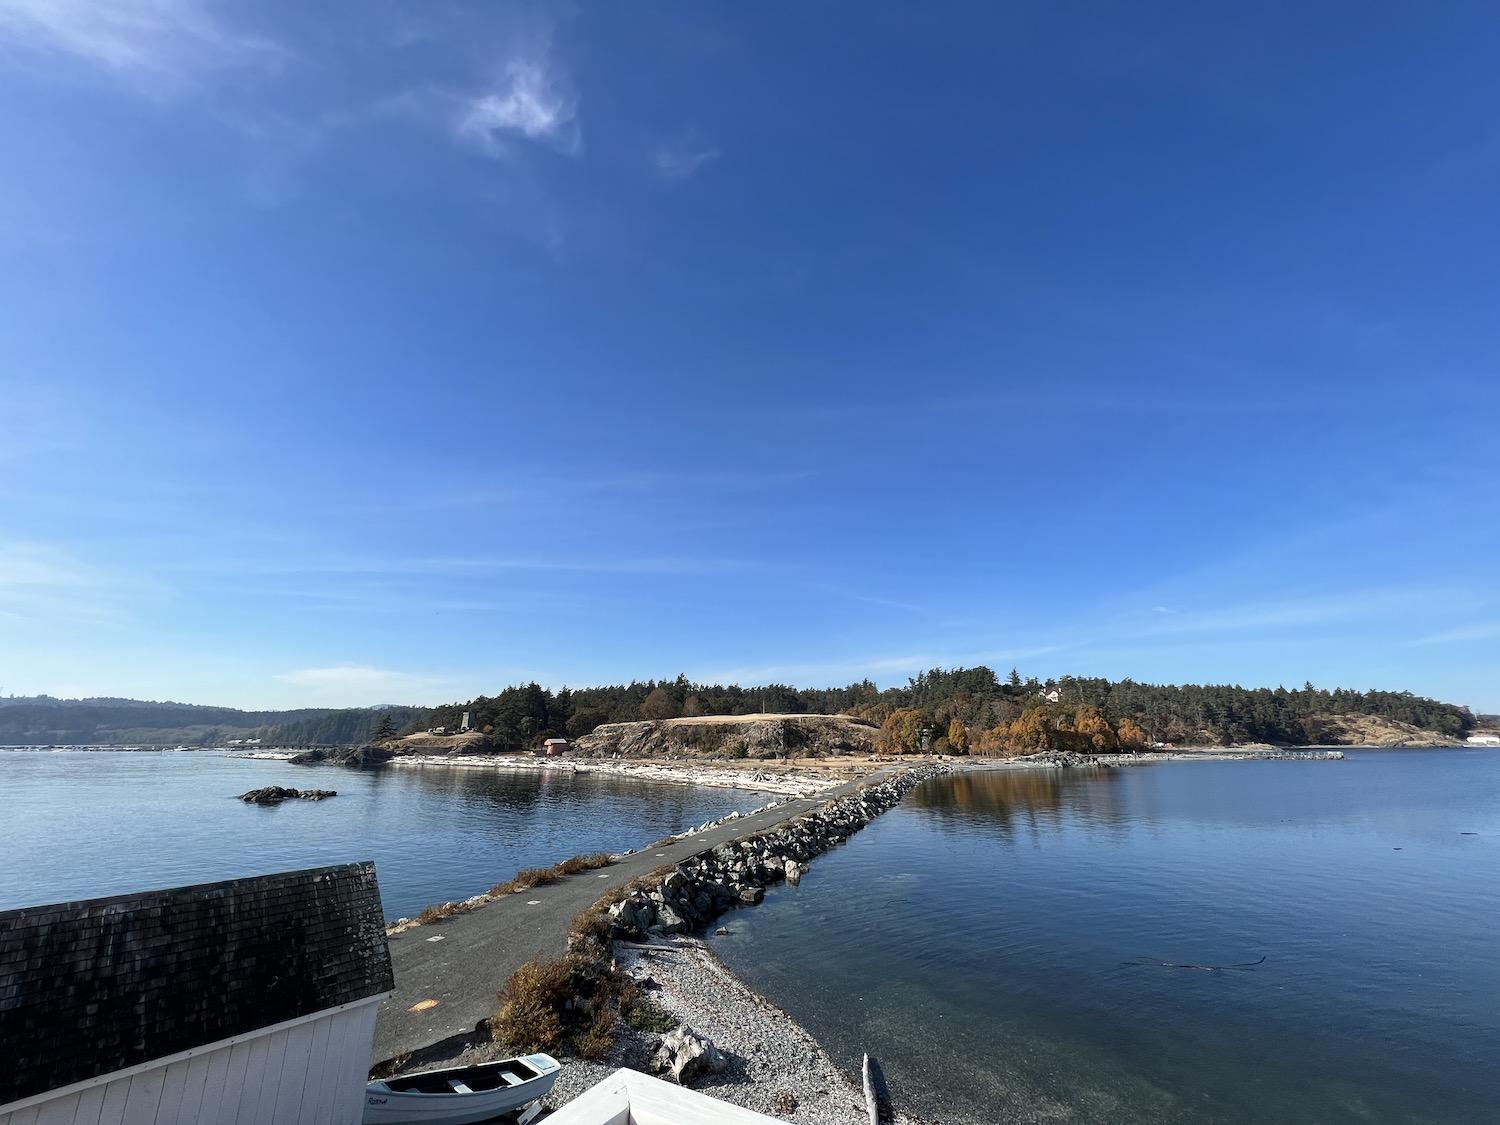 Looking over the causeway from the Fisgard Lighthouse, you can see how the British disguised the existence of Fort Rodd Hill when it was a military fortress.